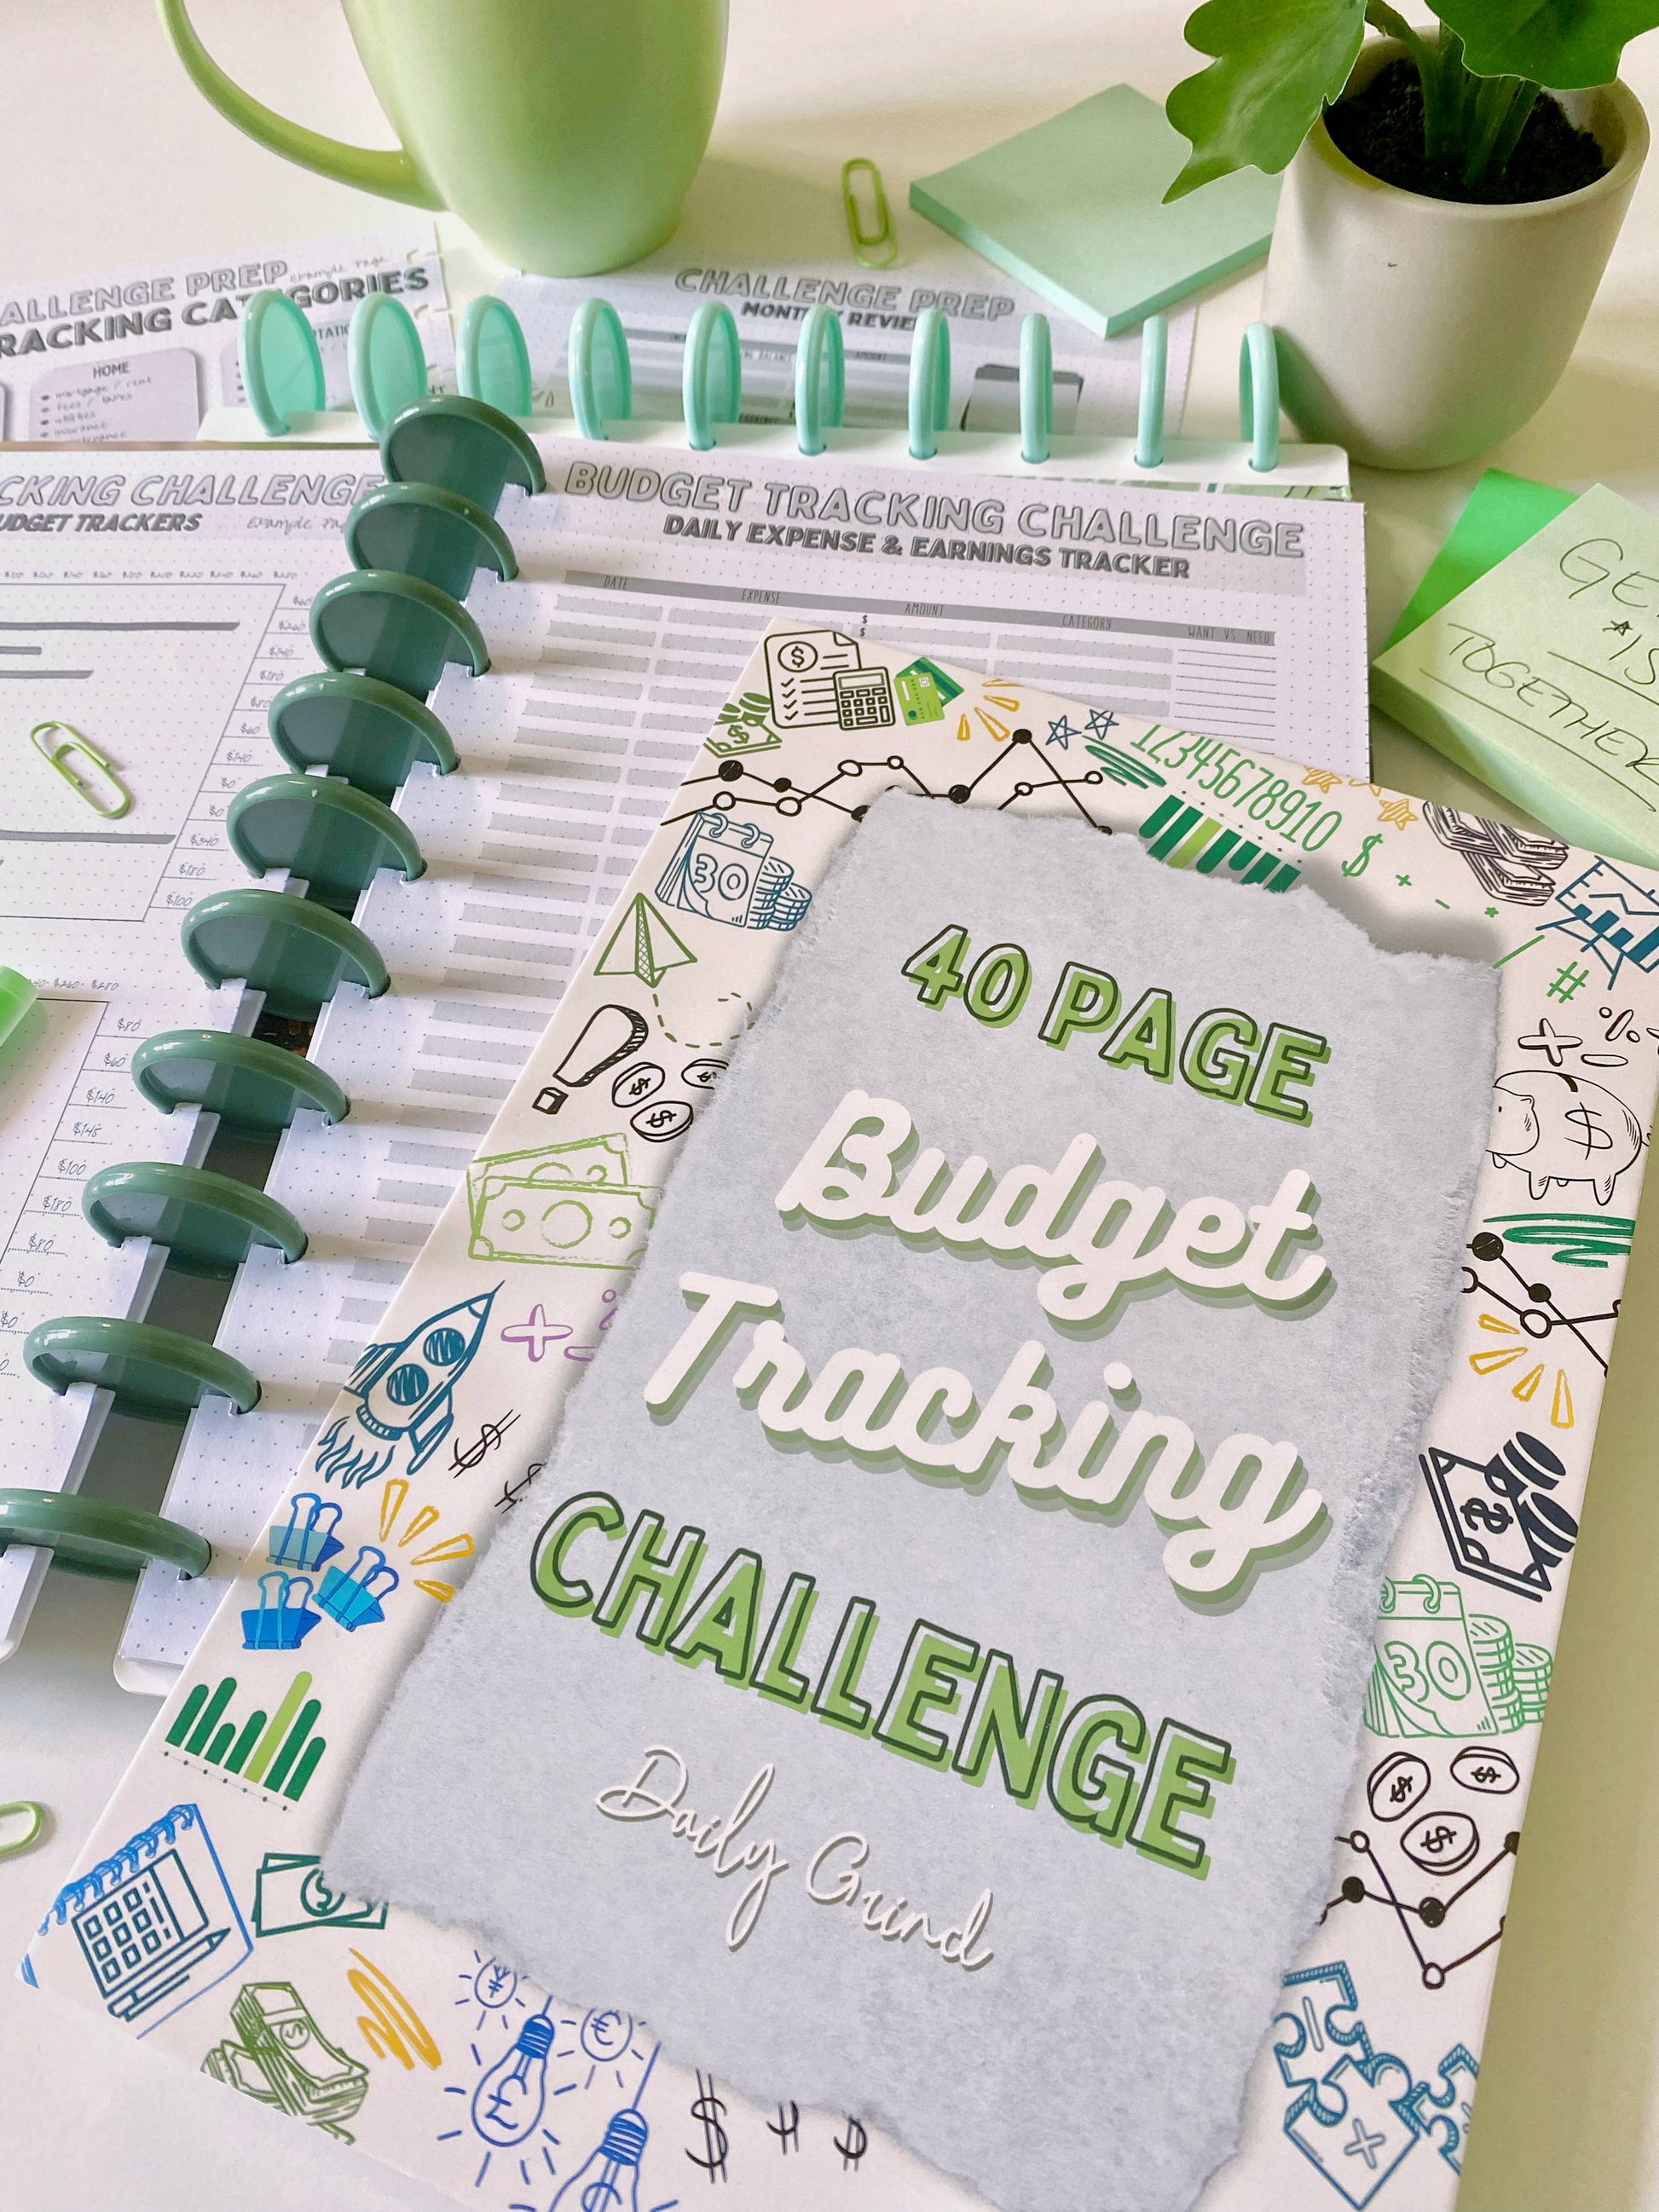 Budget tracker page and disc-bound planners